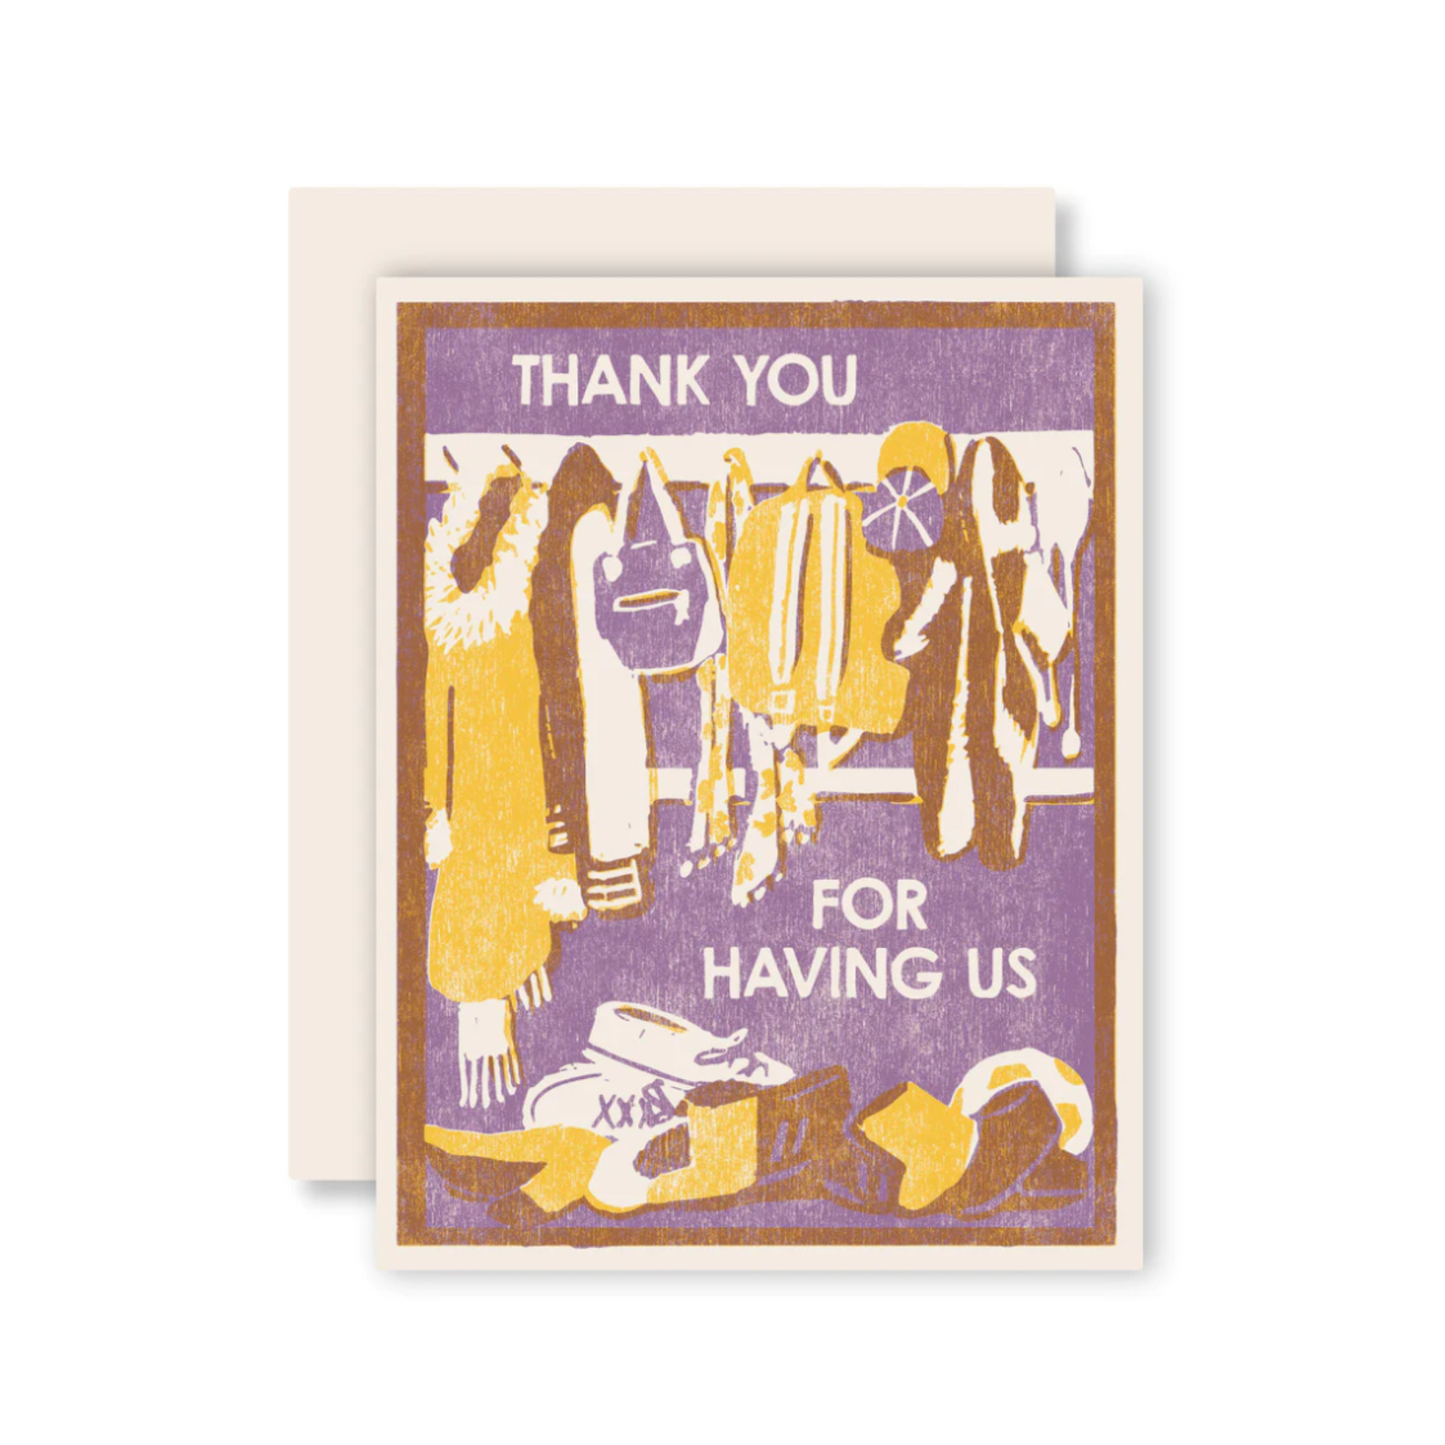 "Thank You For Having Us" Letterpress Greeting Card - Box Set of 6